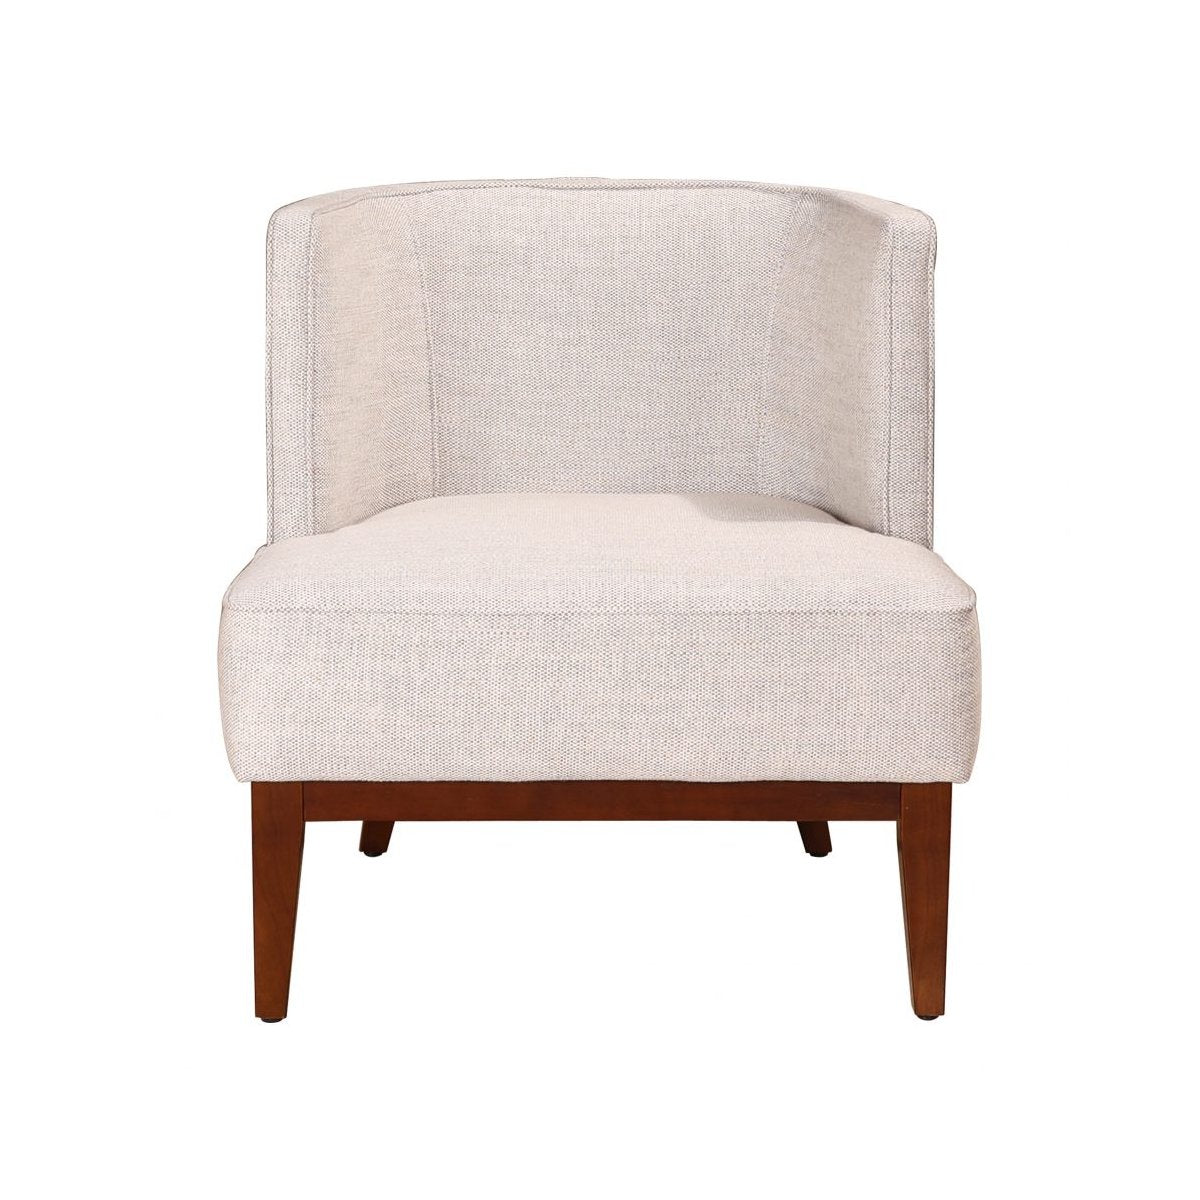 Load image into Gallery viewer, Daniel Chair Light Grey Occasional Chairs Moe&amp;#39;s     Four Hands, Burke Decor, Mid Century Modern Furniture, Old Bones Furniture Company, Old Bones Co, Modern Mid Century, Designer Furniture, https://www.oldbonesco.com/
